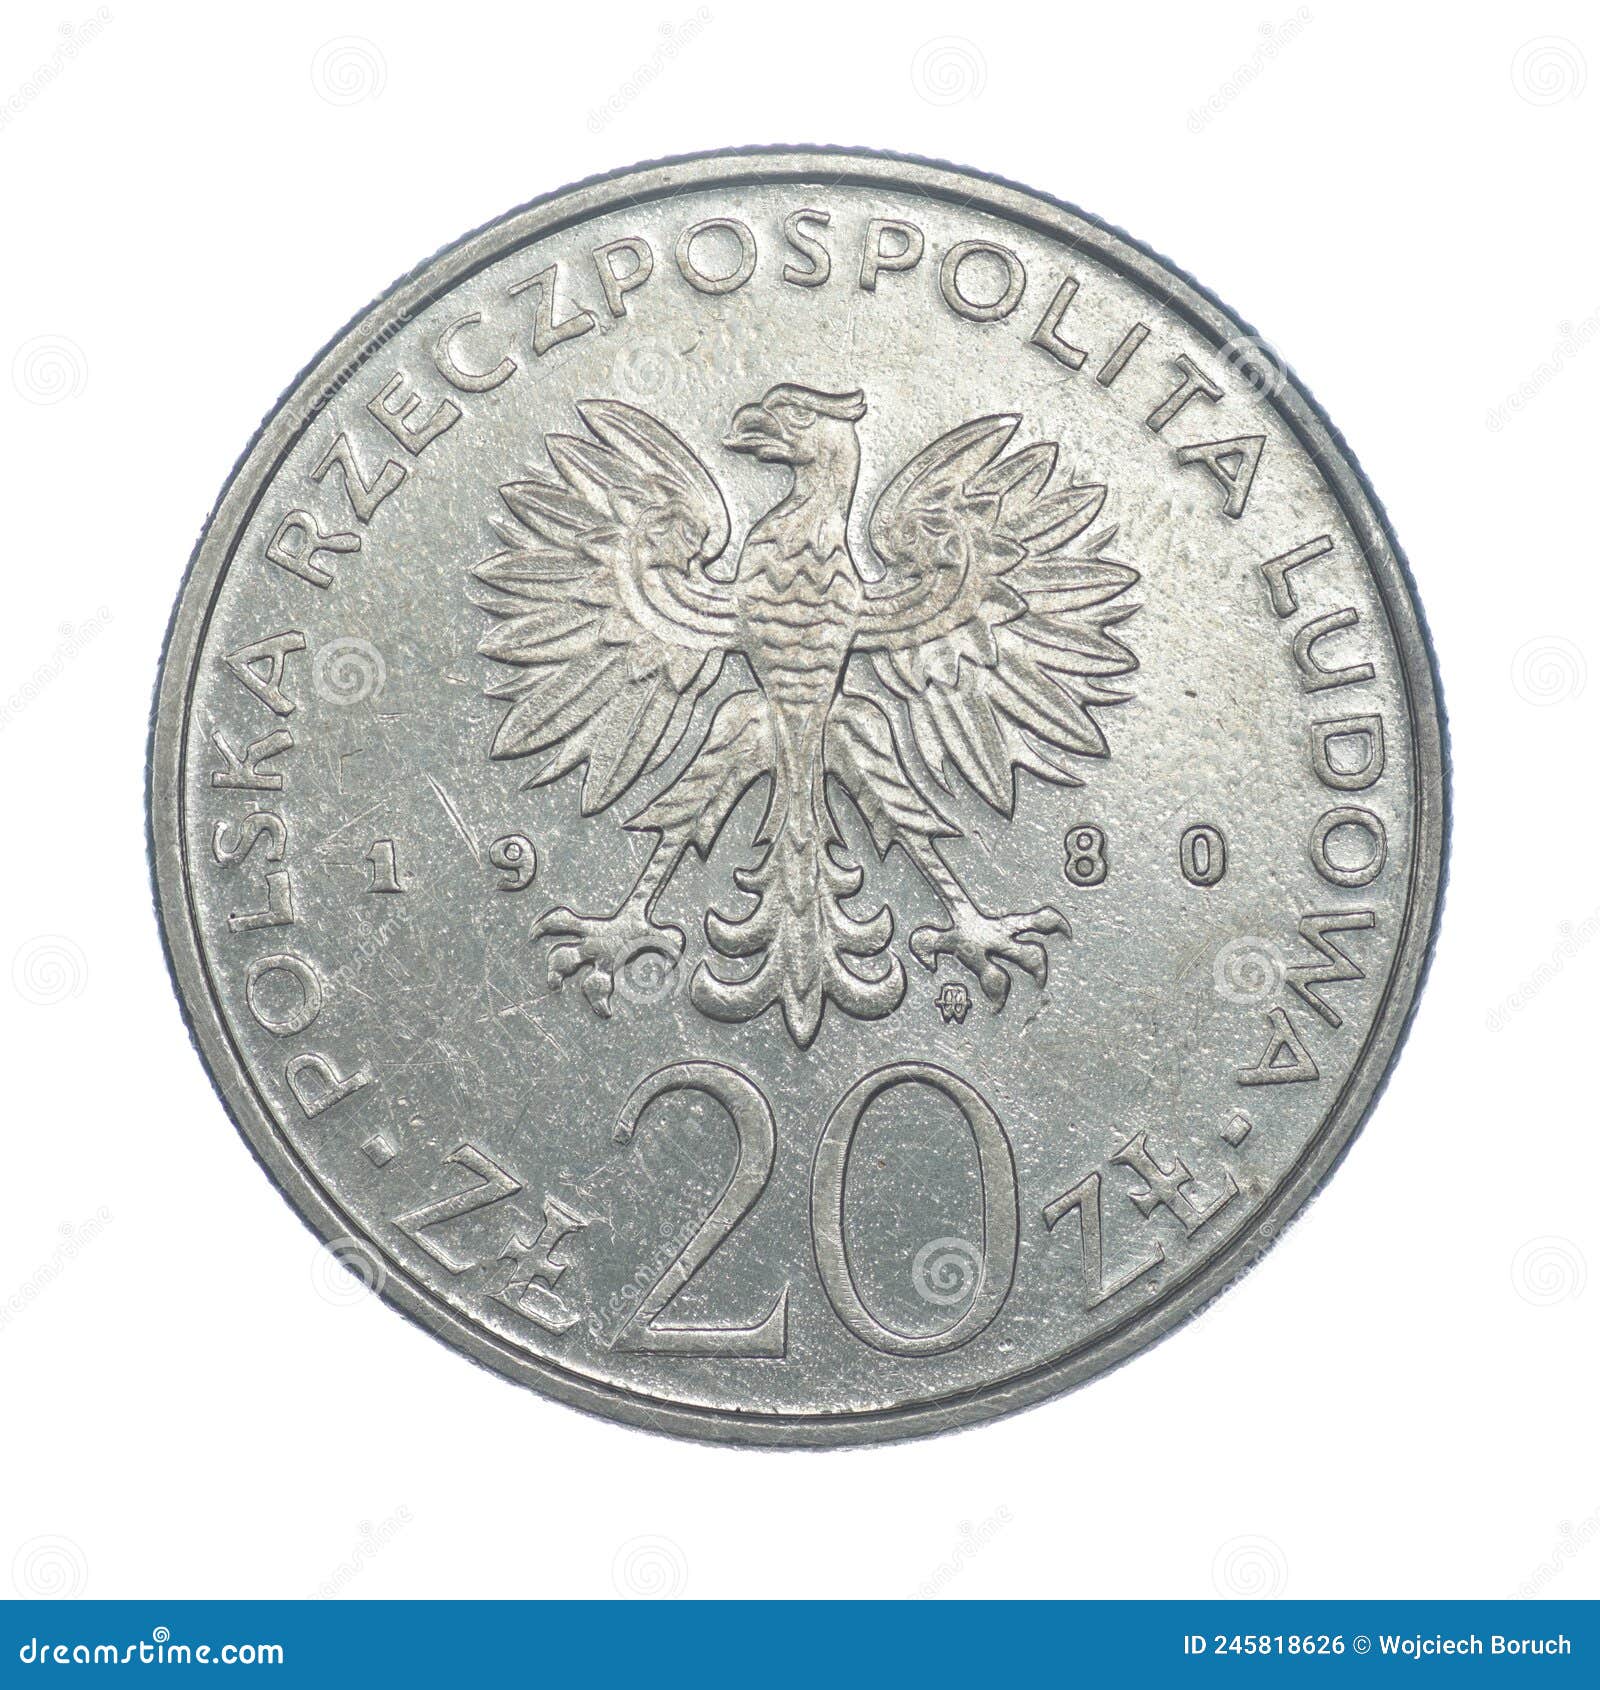 20 zlotys - games of the xxii olympiad - 1980